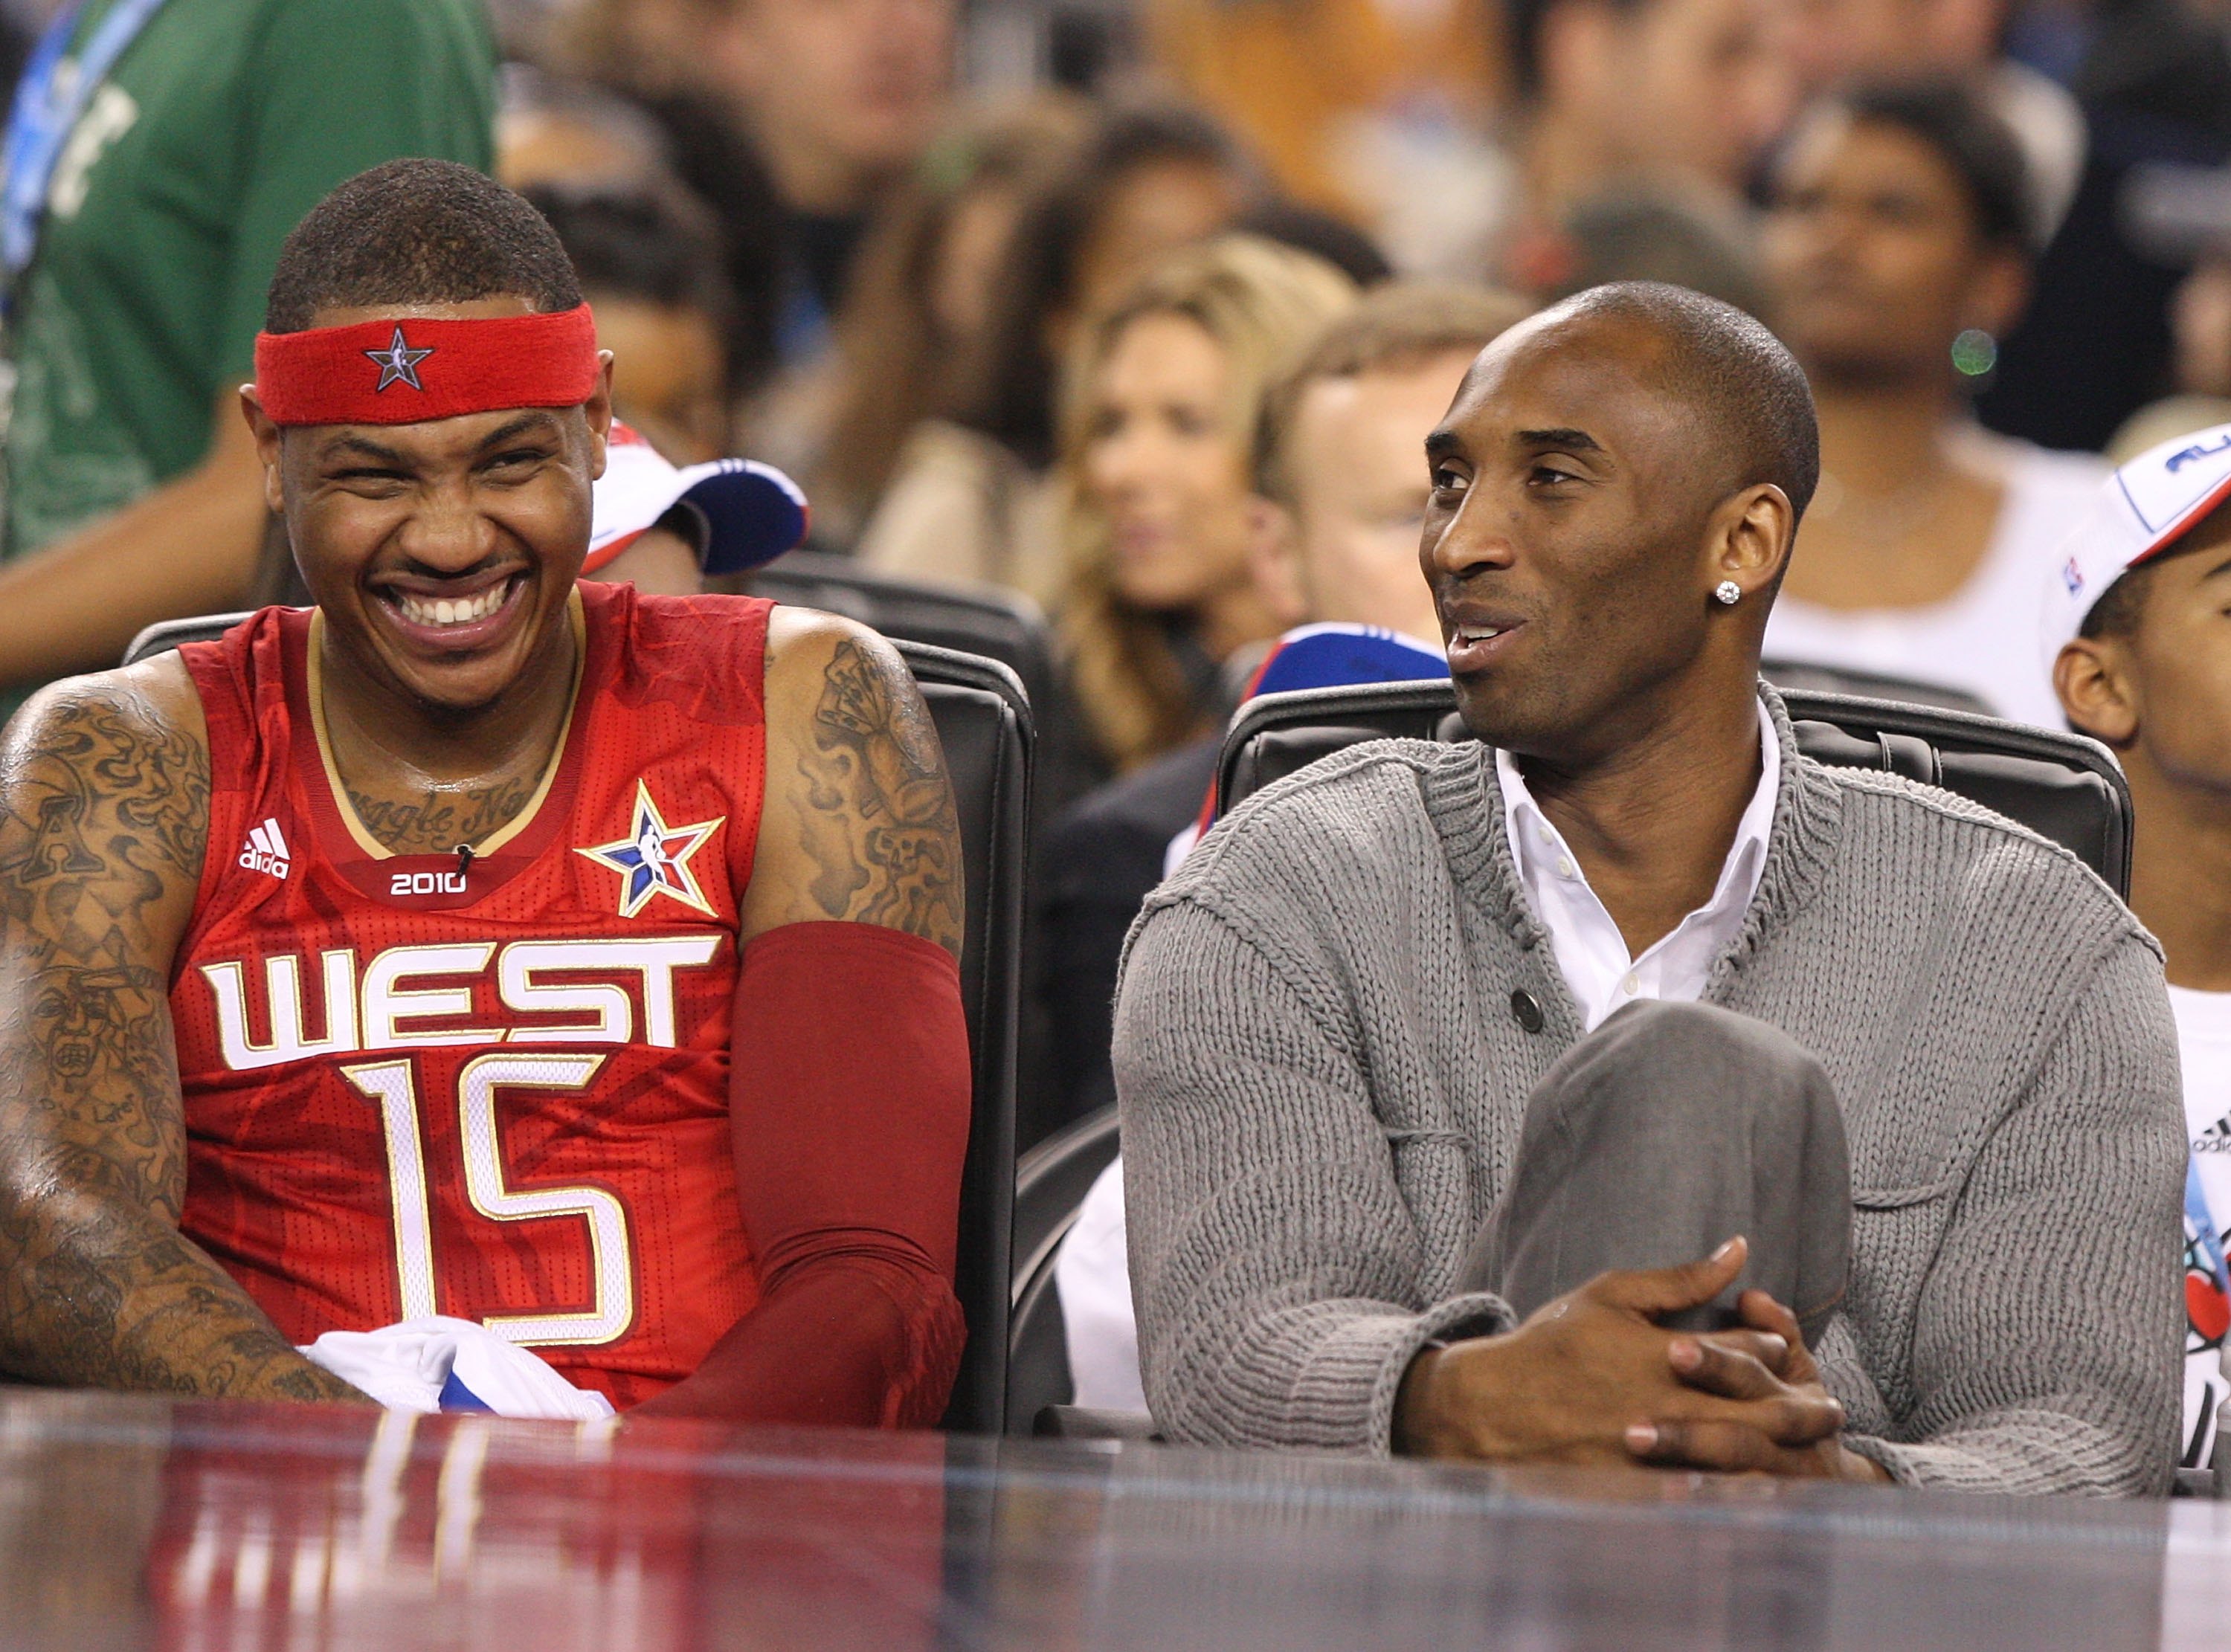 ARLINGTON, TX - FEBRUARY 14:  An injured Kobe Bryant sits on on the bench with Carmelo Anthony #15 of the Western All-Stars during the the NBA All-Star Game, part of 2010 NBA All-Star Weekend at Cowboys Stadium on February 14, 2010 in Arlington, Texas. NO